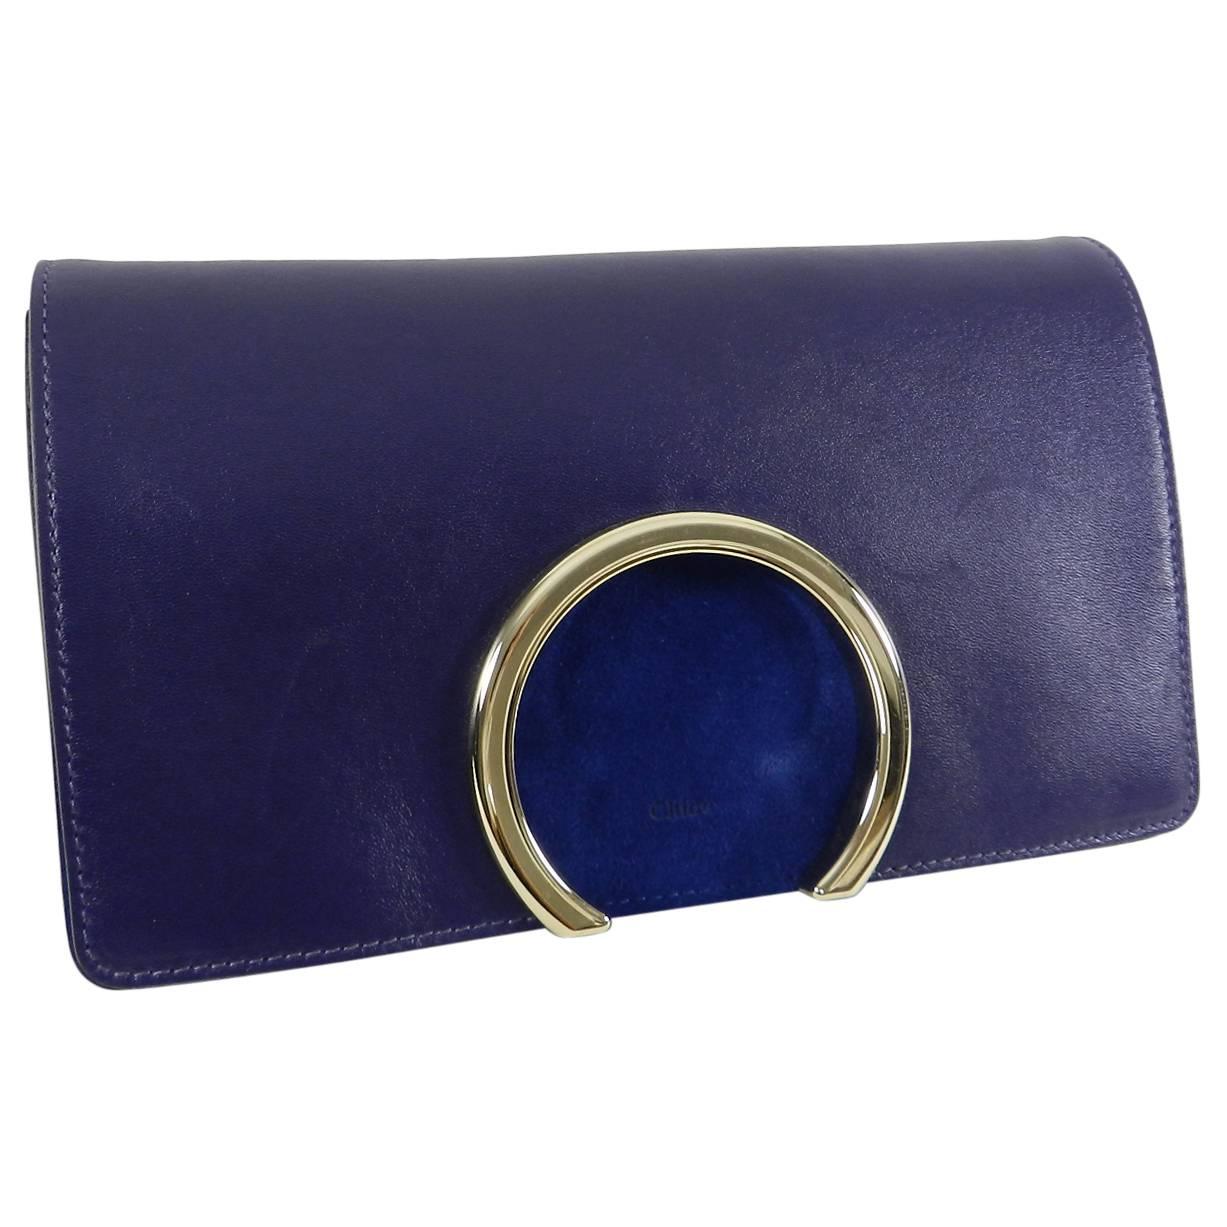 Navy smooth calfskin leather and suede clutch with magnetic closure gold tone hardware. Lined with nude leather, zipper centre compartment, excellent pre-owned condition. Measures 10”x 6”x 1.75”.